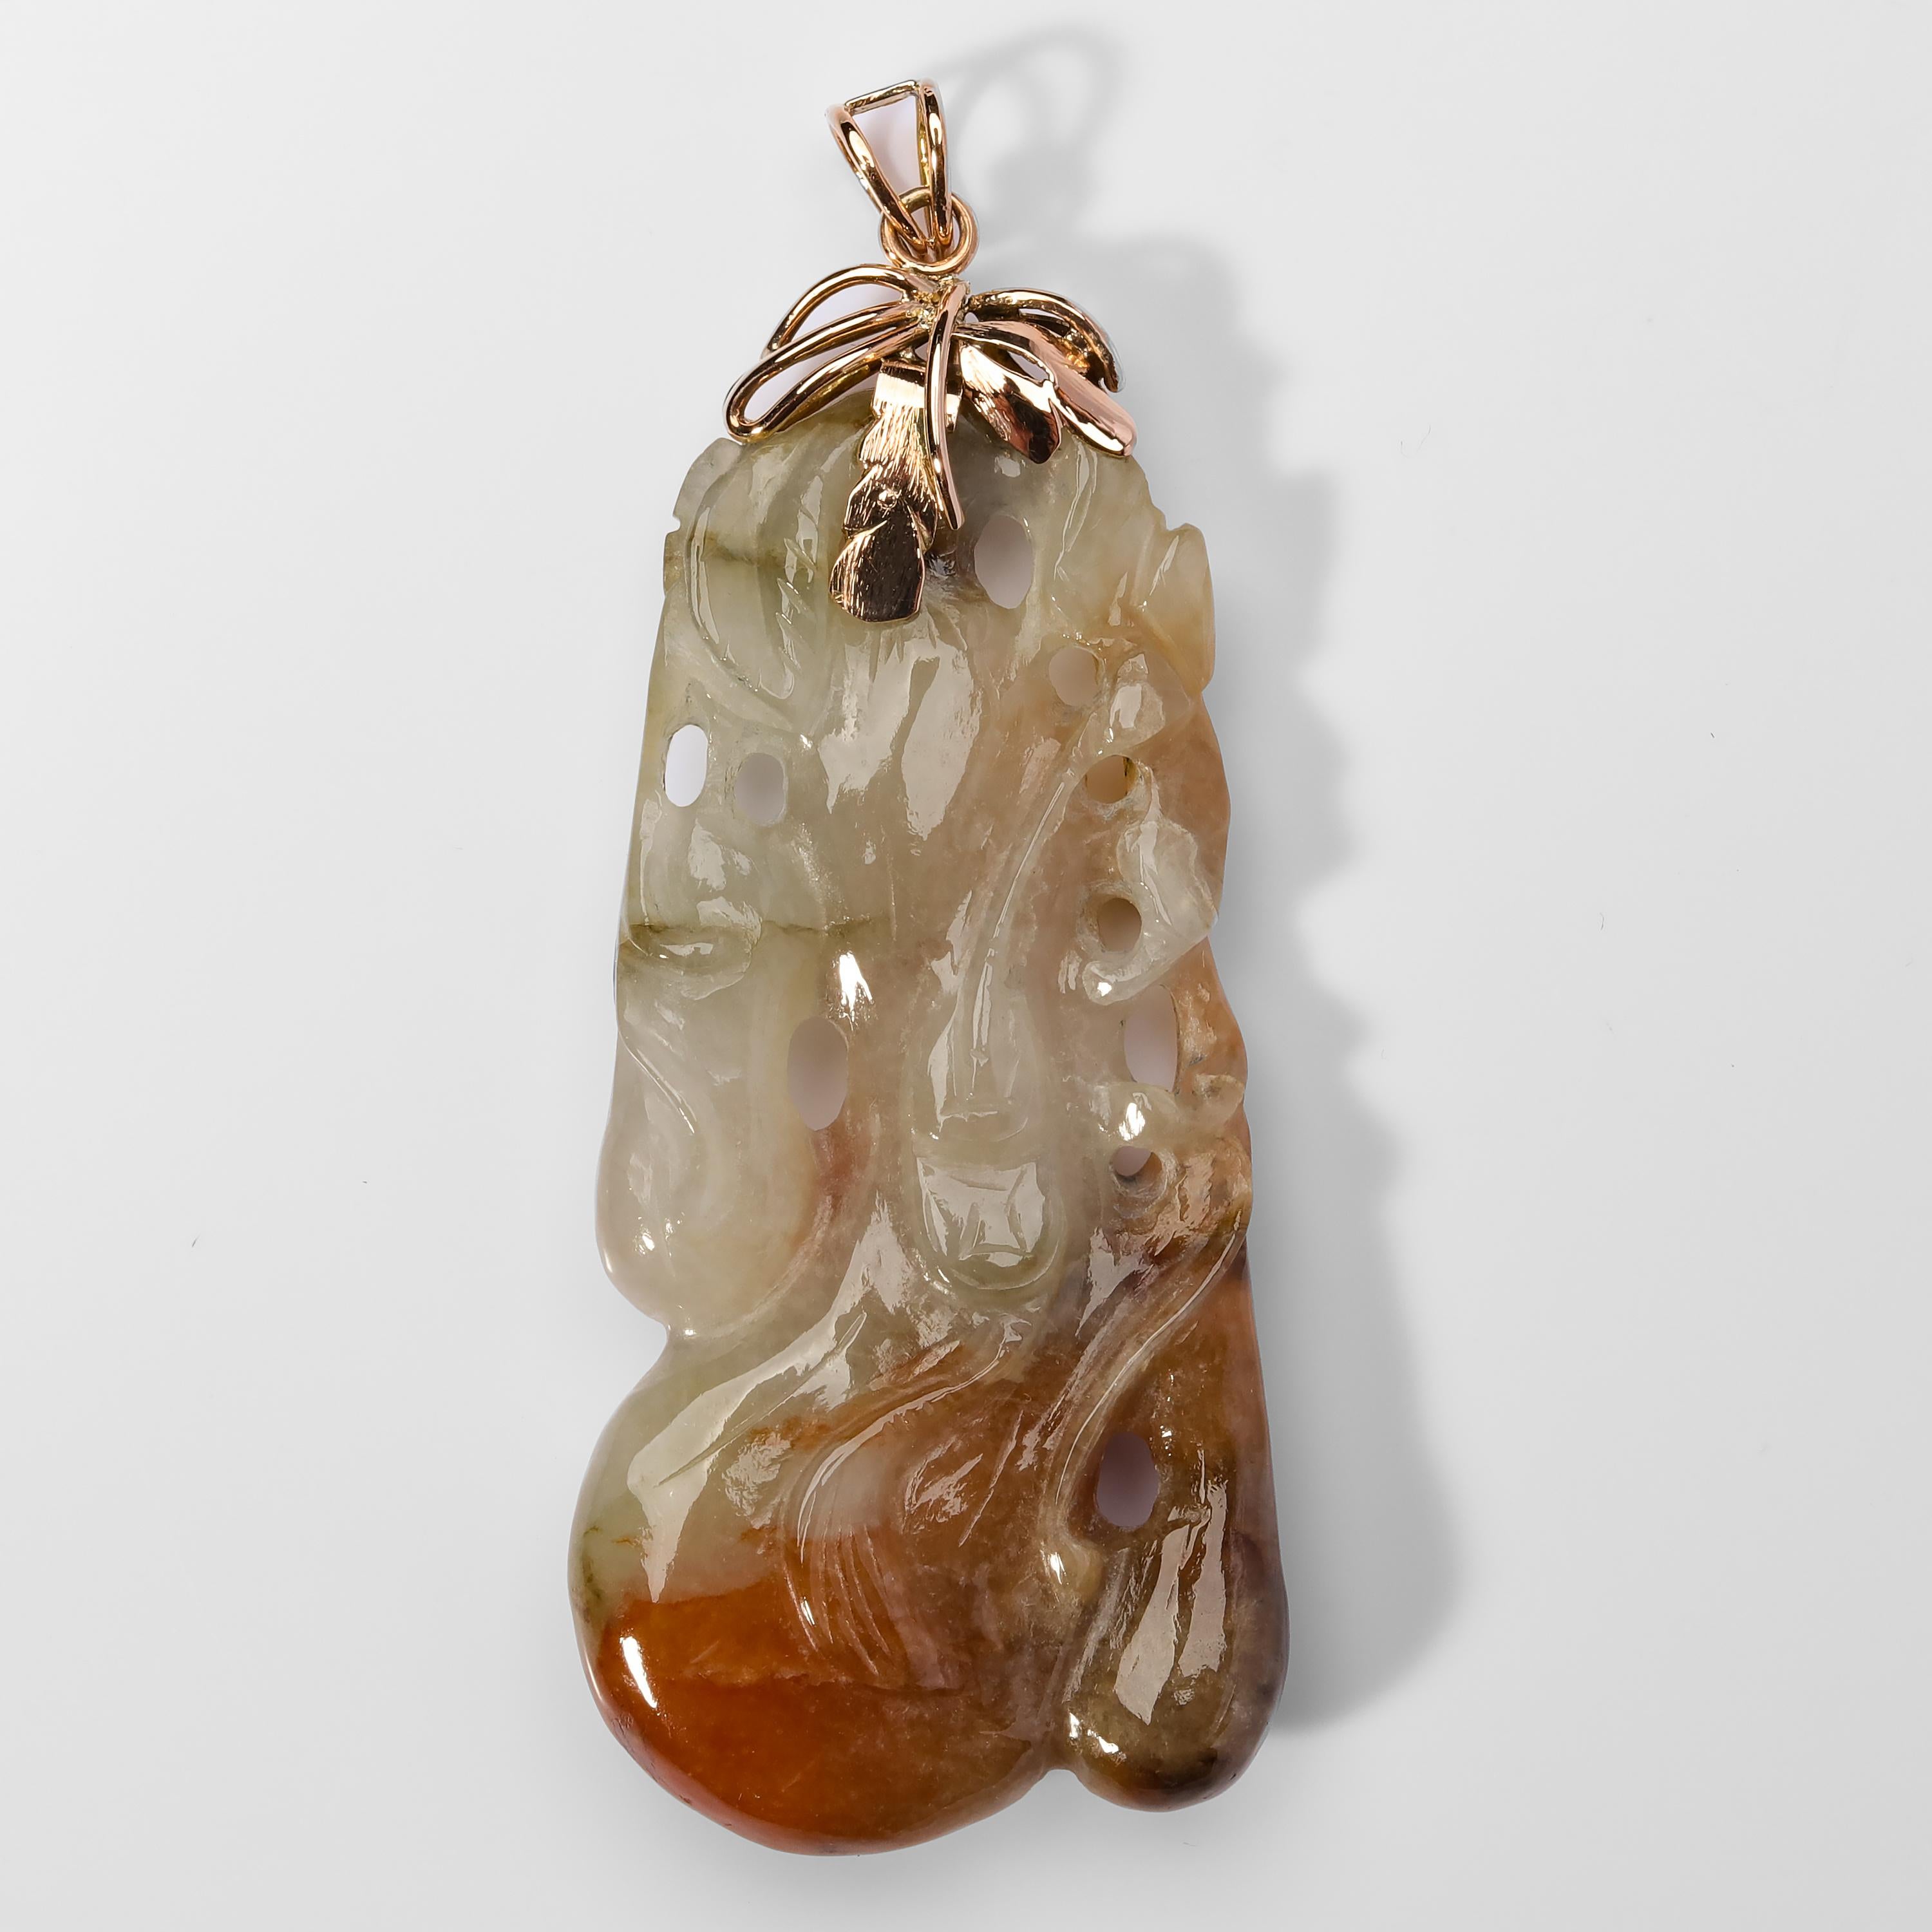 Measuring 55.7mm tall by 27.35mm wide, this Retro-era multicolor natural Burmese jadeite pendant hand-carved to depict a gourd. In Chinese culture, gourds have greater significance than people in Western society attribute to them. In China, gourds